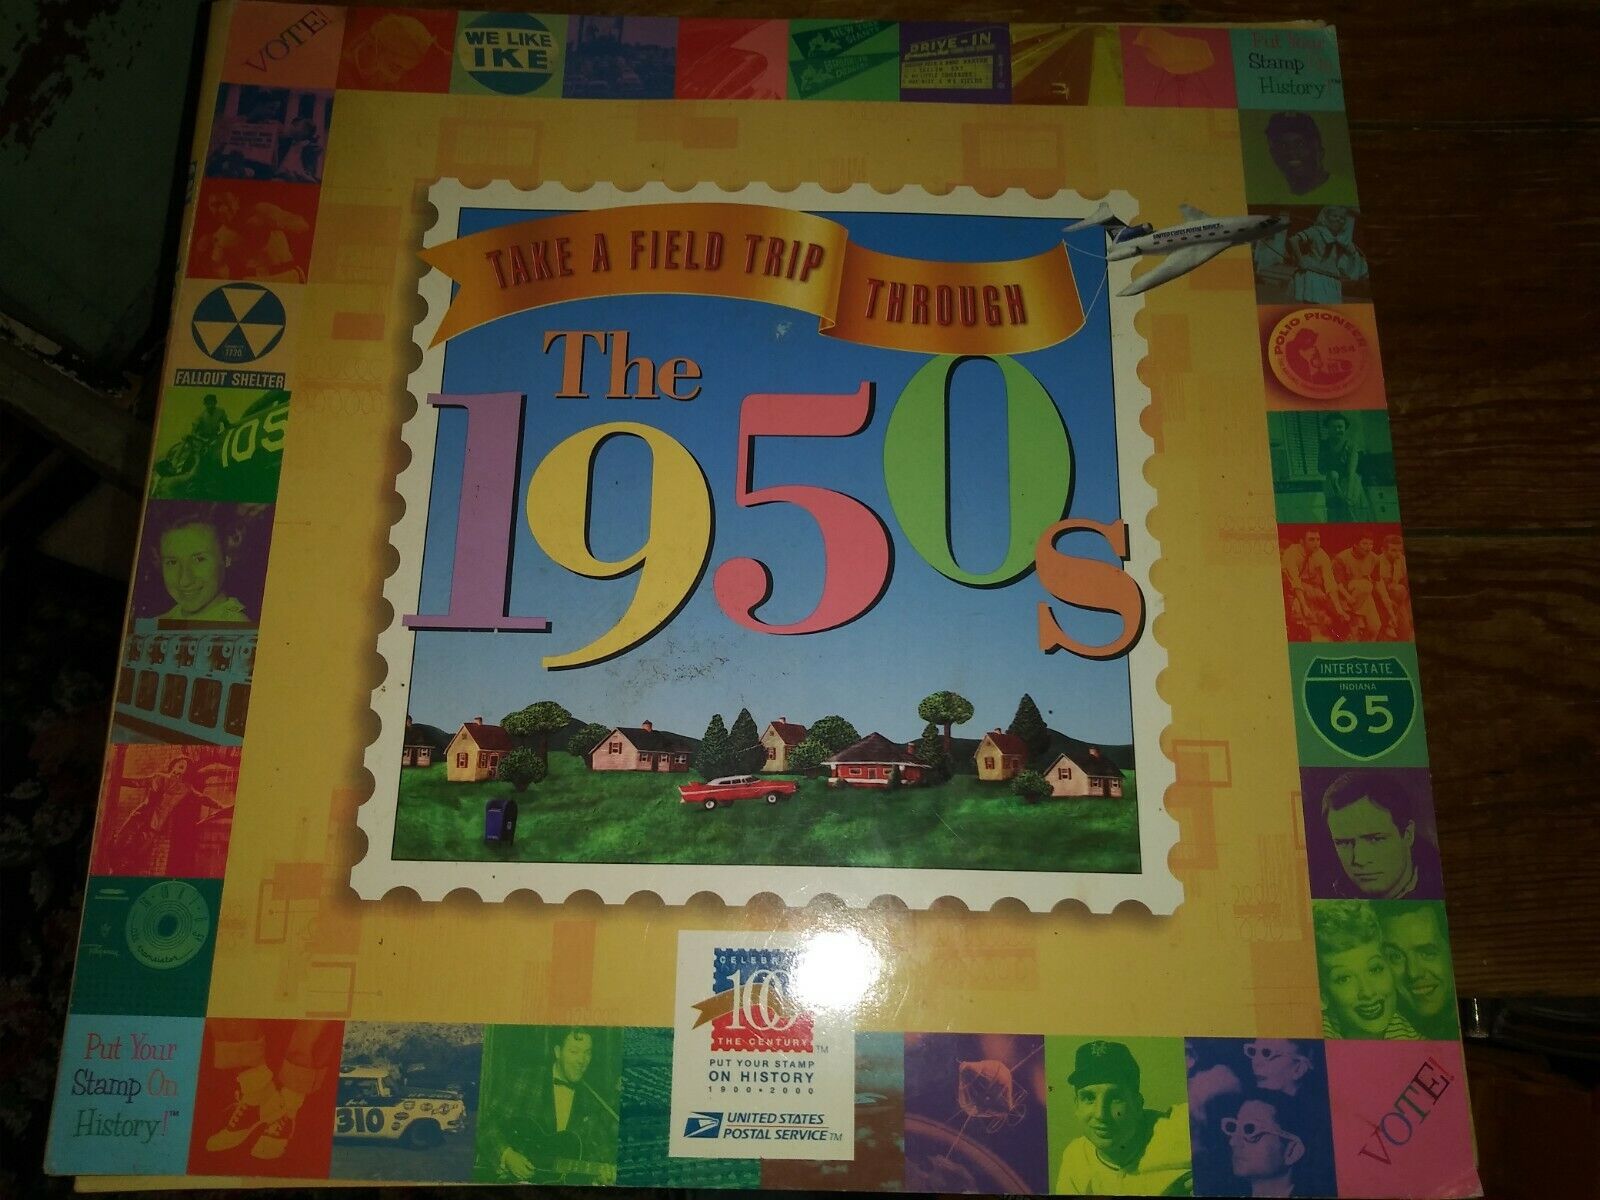 GUC COMPLETE Take a Field Trip Through the 1950s USPS stamp history teaching set